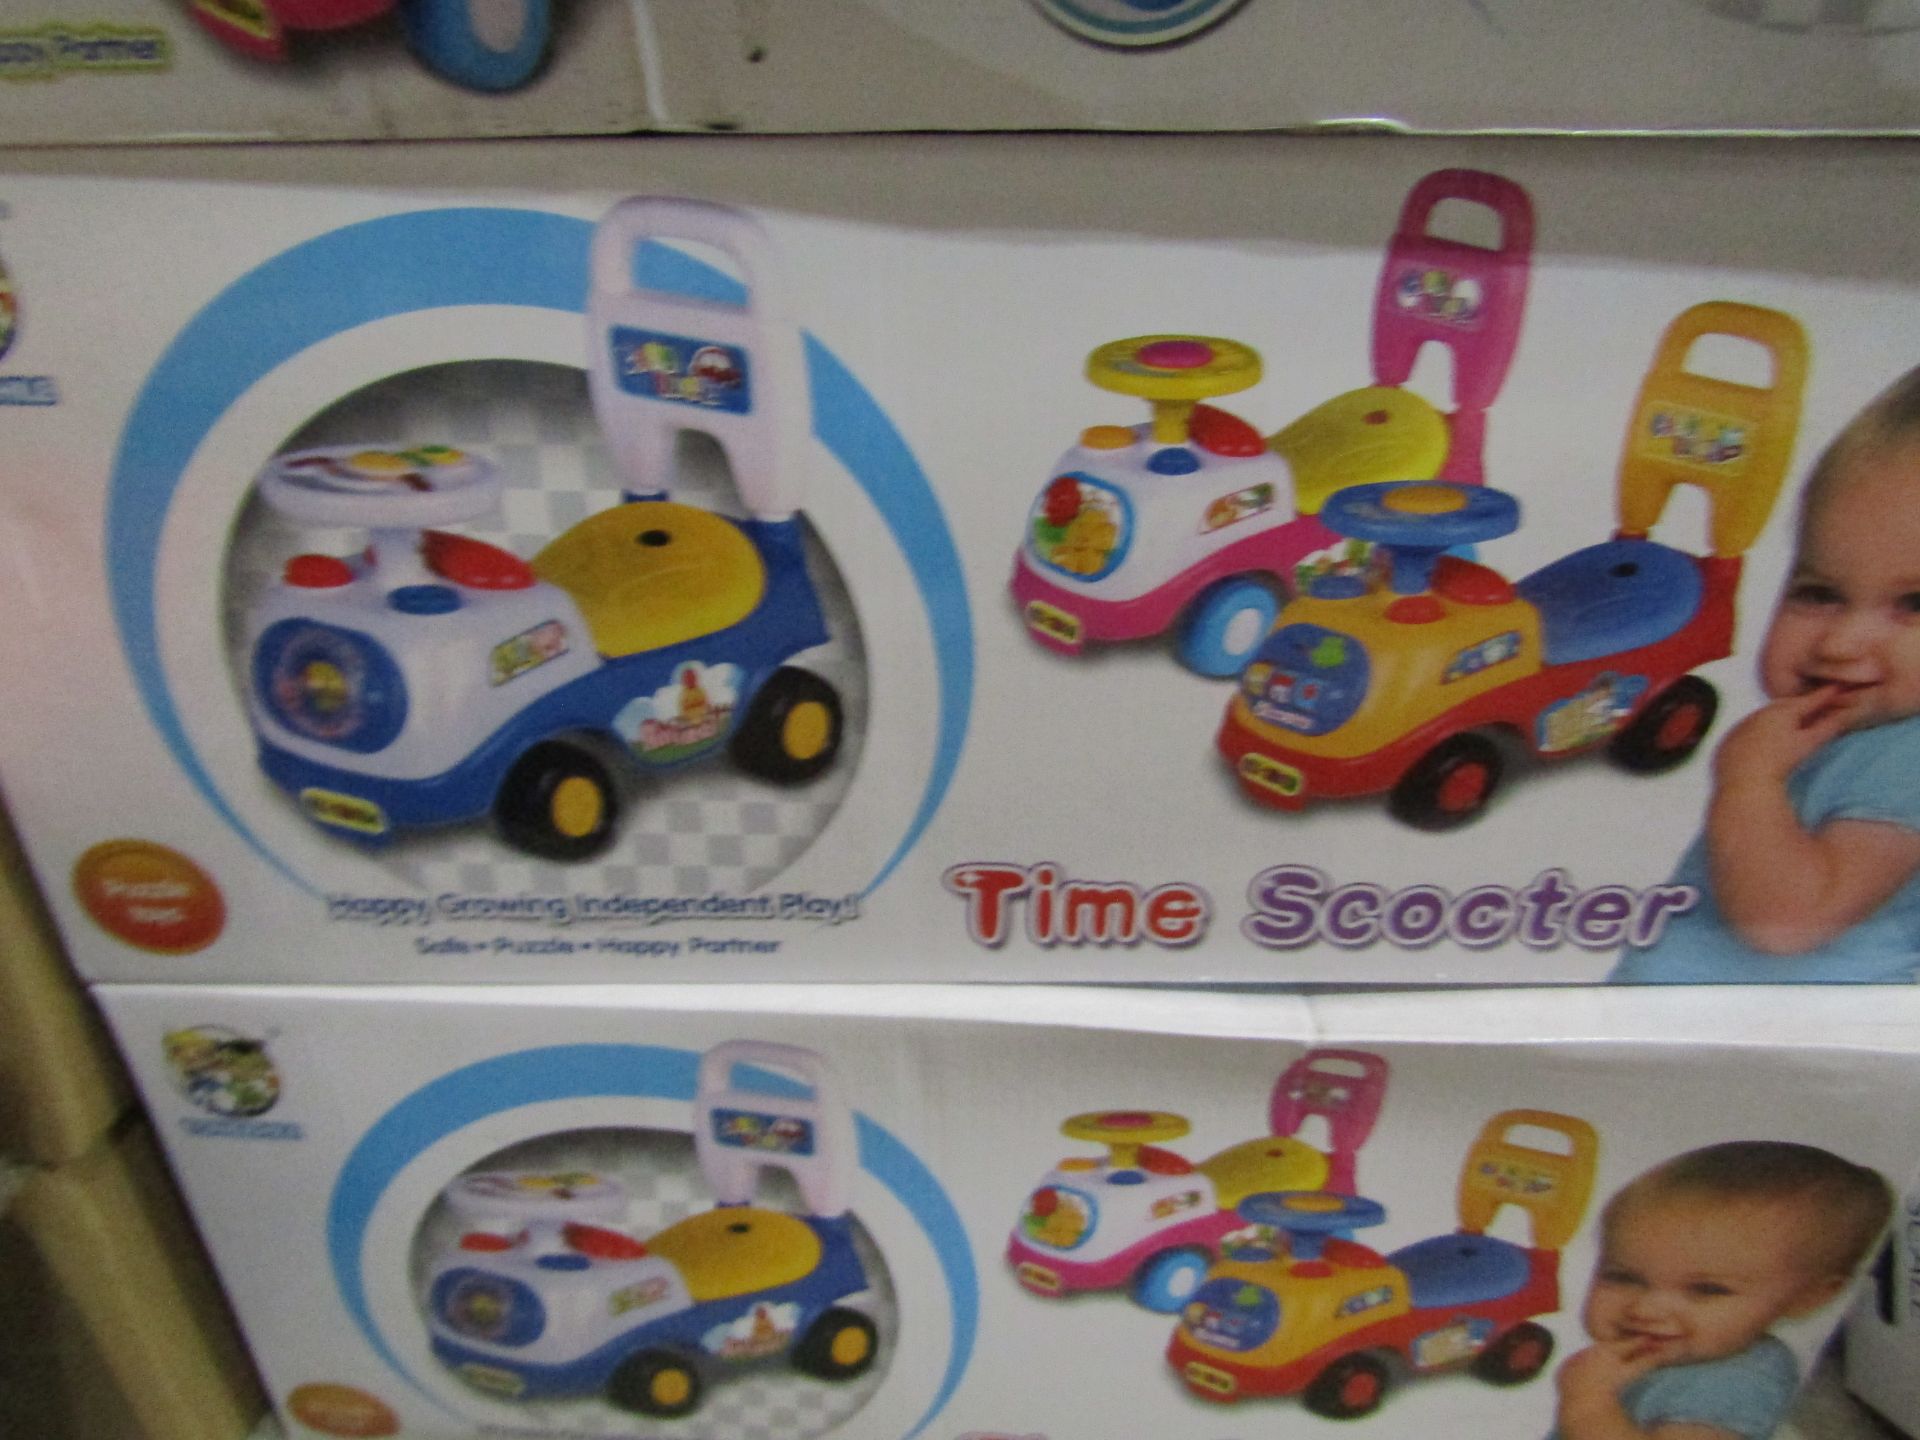 Tongzhile Childrens Time Scooter Looks Unused & Boxed